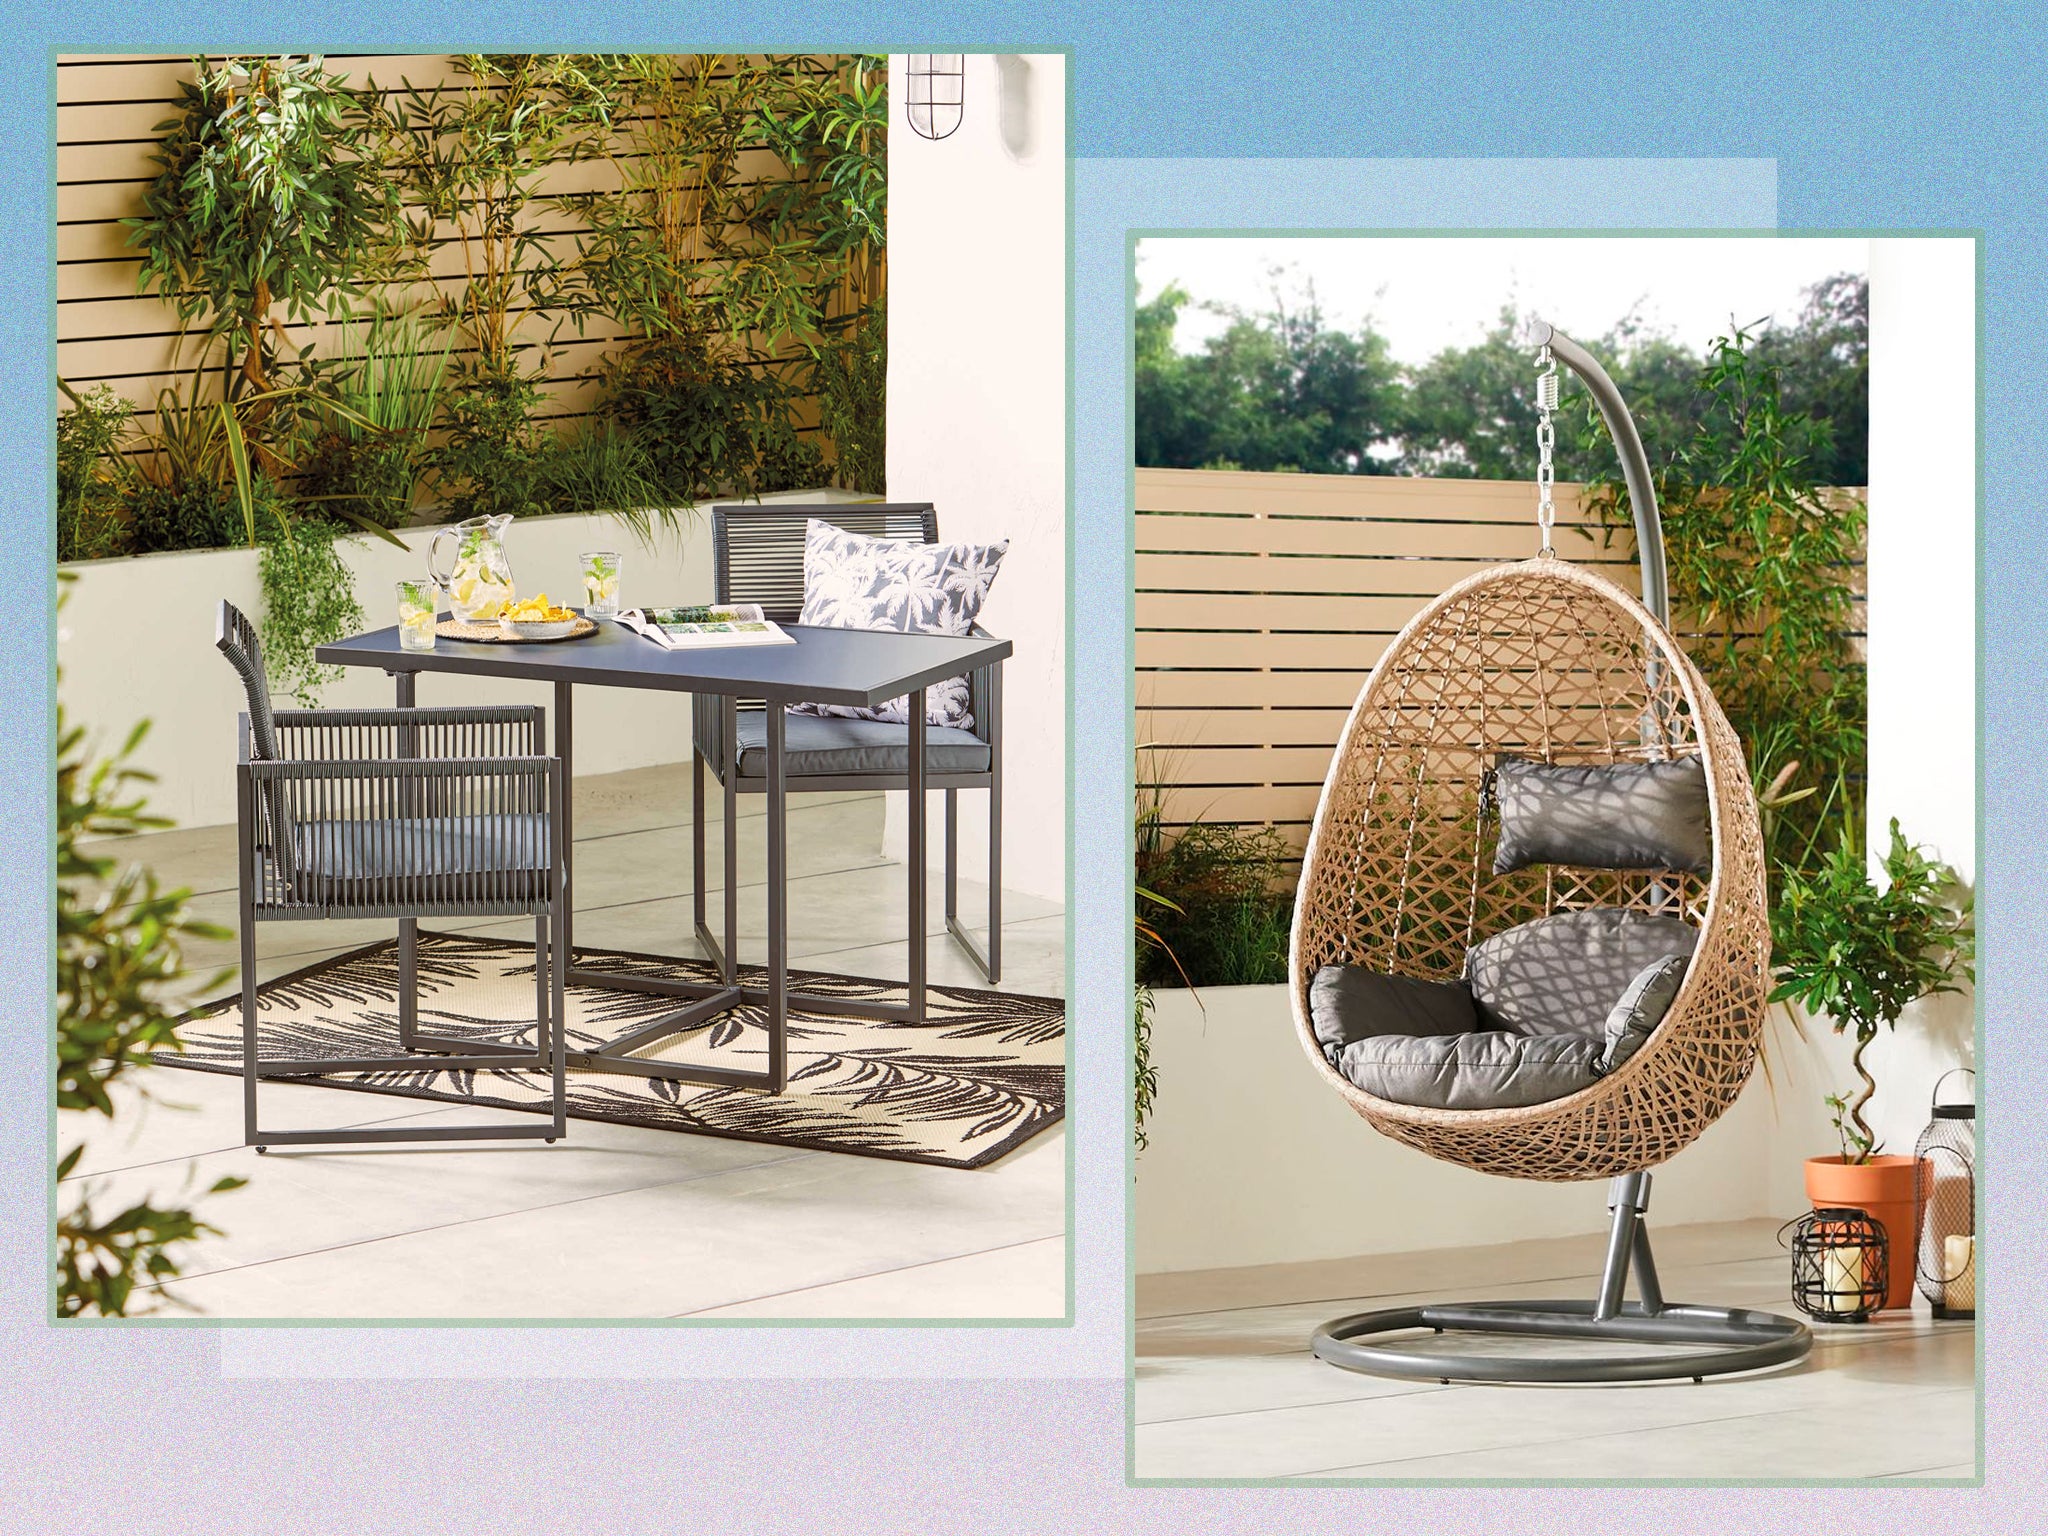 Aldi’s garden furniture range has returned for 2023 – and you can save 40% right now